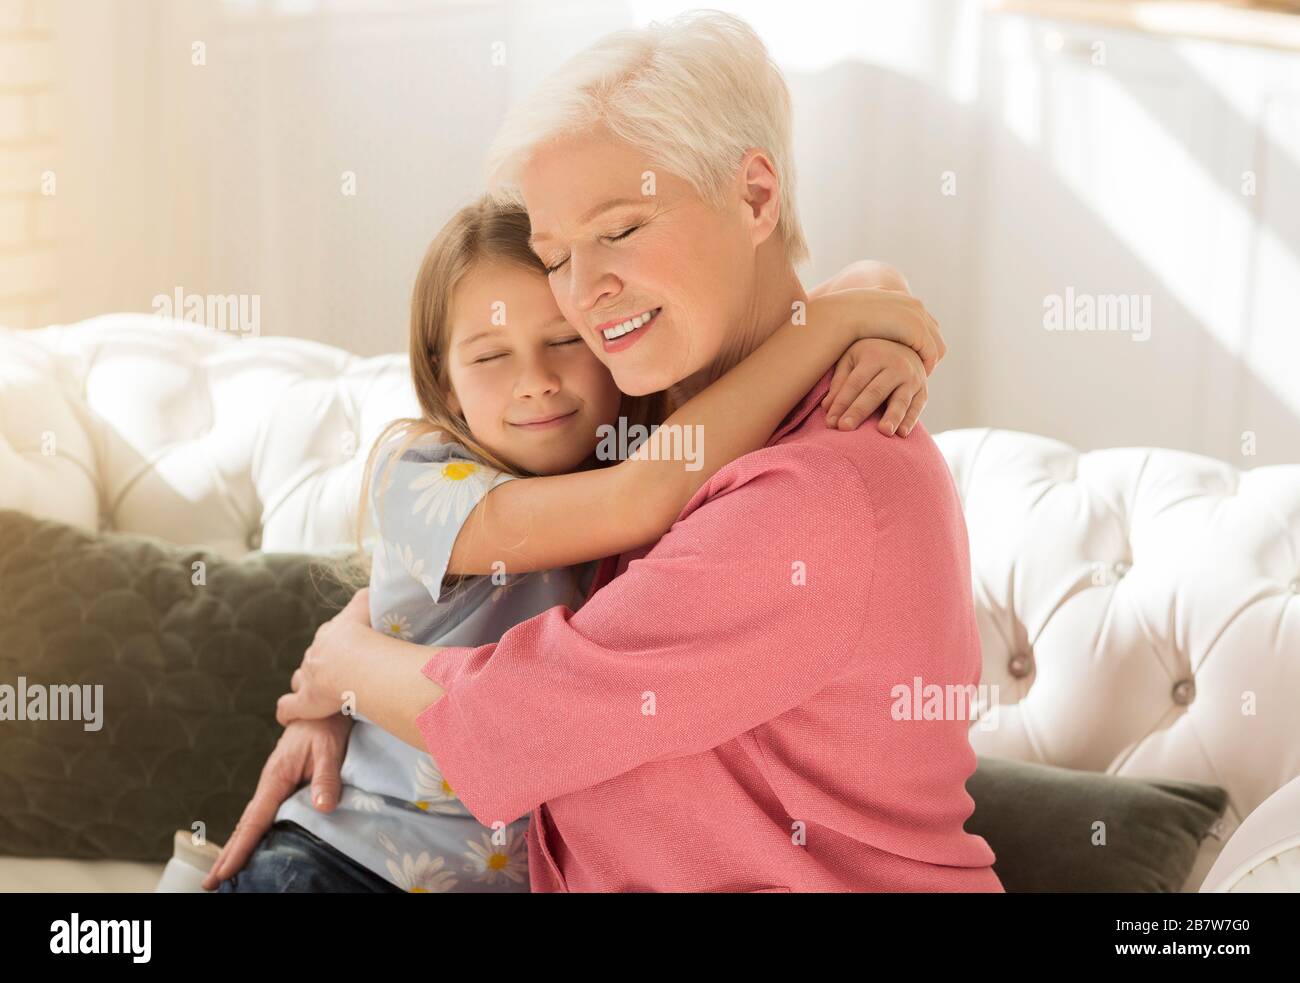 Aged woman with her grandchild embracing each other in light room Stock Photo